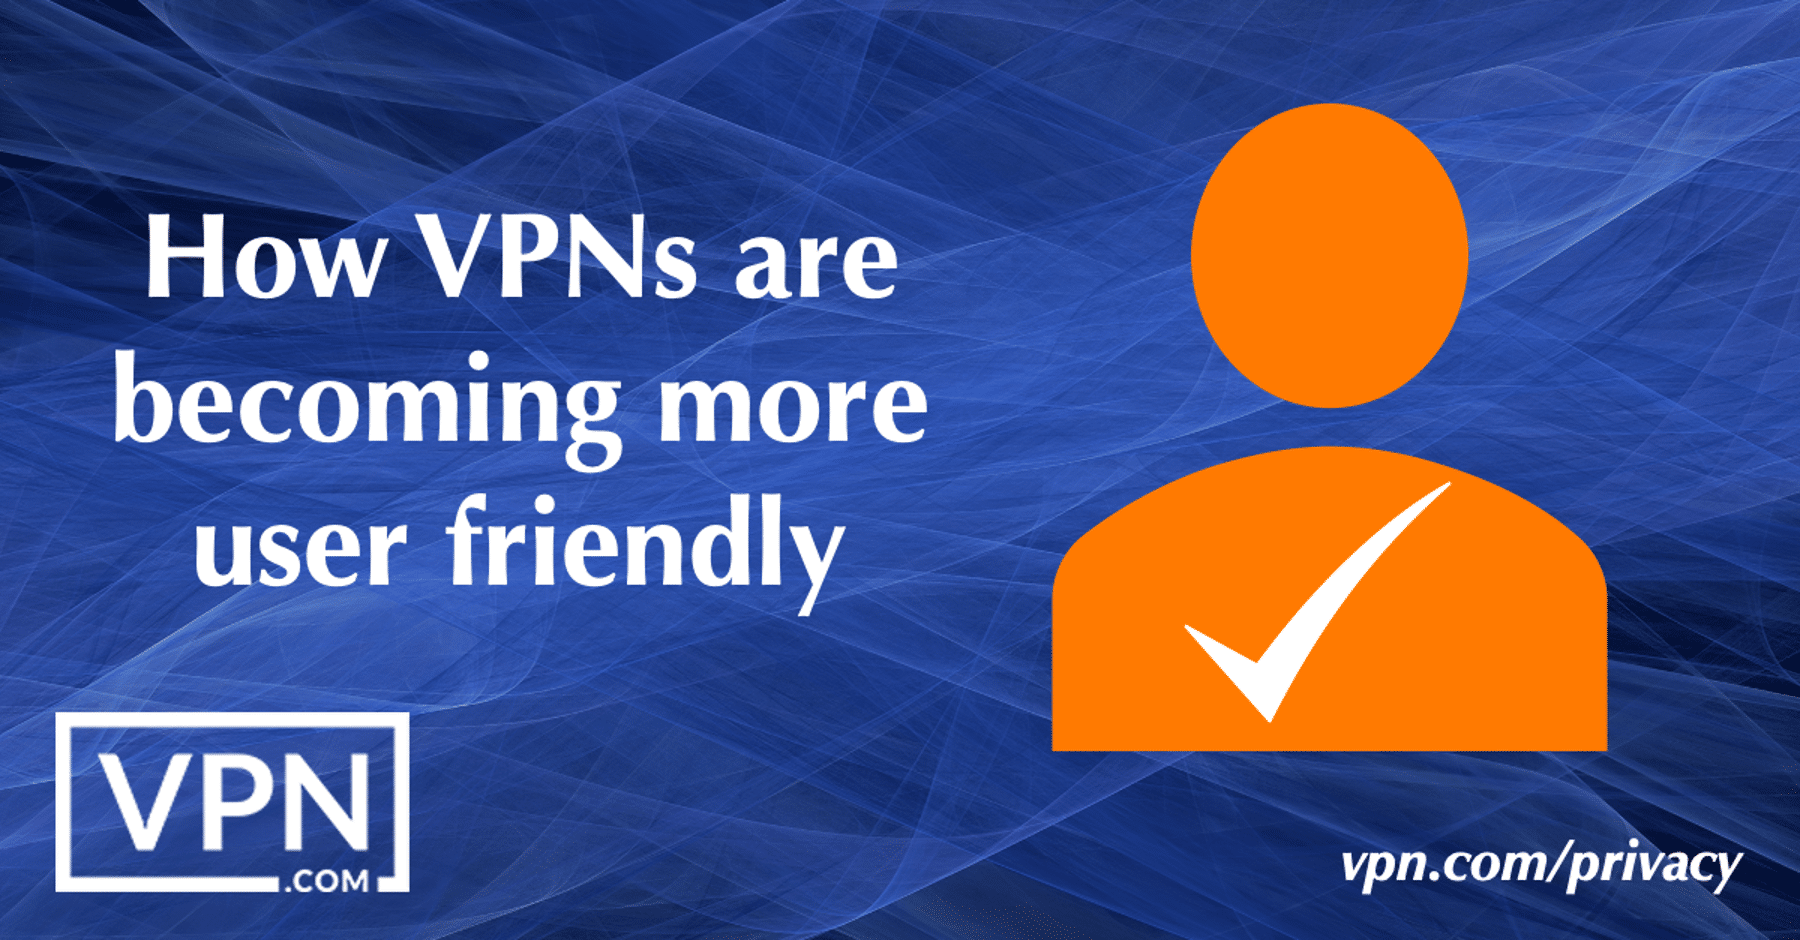 How VPNs are becoming more user friendly.